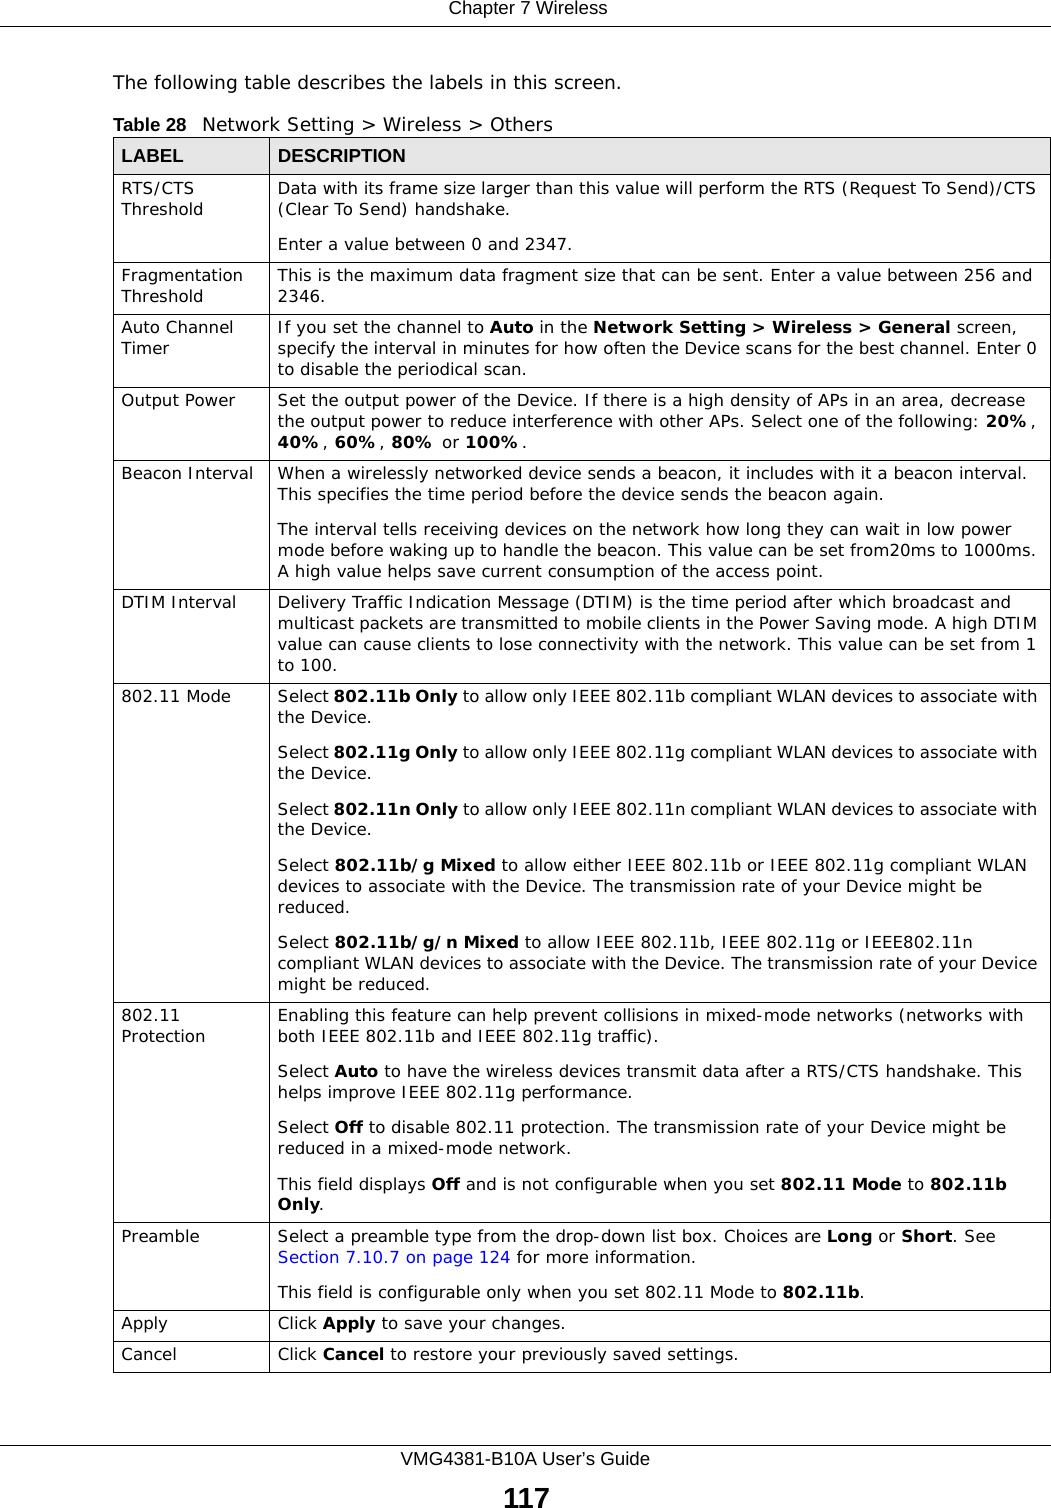  Chapter 7 WirelessVMG4381-B10A User’s Guide117The following table describes the labels in this screen. Table 28   Network Setting &gt; Wireless &gt; OthersLABEL DESCRIPTIONRTS/CTS Threshold Data with its frame size larger than this value will perform the RTS (Request To Send)/CTS (Clear To Send) handshake. Enter a value between 0 and 2347. Fragmentation Threshold This is the maximum data fragment size that can be sent. Enter a value between 256 and 2346. Auto Channel Timer If you set the channel to Auto in the Network Setting &gt; Wireless &gt; General screen, specify the interval in minutes for how often the Device scans for the best channel. Enter 0 to disable the periodical scan.Output Power Set the output power of the Device. If there is a high density of APs in an area, decrease the output power to reduce interference with other APs. Select one of the following: 20%, 40%, 60%, 80% or 100%. Beacon Interval When a wirelessly networked device sends a beacon, it includes with it a beacon interval. This specifies the time period before the device sends the beacon again.The interval tells receiving devices on the network how long they can wait in low power mode before waking up to handle the beacon. This value can be set from20ms to 1000ms. A high value helps save current consumption of the access point.DTIM Interval Delivery Traffic Indication Message (DTIM) is the time period after which broadcast and multicast packets are transmitted to mobile clients in the Power Saving mode. A high DTIM value can cause clients to lose connectivity with the network. This value can be set from 1 to 100.802.11 Mode Select 802.11b Only to allow only IEEE 802.11b compliant WLAN devices to associate with the Device.Select 802.11g Only to allow only IEEE 802.11g compliant WLAN devices to associate with the Device.Select 802.11n Only to allow only IEEE 802.11n compliant WLAN devices to associate with the Device.Select 802.11b/g Mixed to allow either IEEE 802.11b or IEEE 802.11g compliant WLAN devices to associate with the Device. The transmission rate of your Device might be reduced.Select 802.11b/g/n Mixed to allow IEEE 802.11b, IEEE 802.11g or IEEE802.11n compliant WLAN devices to associate with the Device. The transmission rate of your Device might be reduced.802.11 Protection Enabling this feature can help prevent collisions in mixed-mode networks (networks with both IEEE 802.11b and IEEE 802.11g traffic).Select Auto to have the wireless devices transmit data after a RTS/CTS handshake. This helps improve IEEE 802.11g performance.Select Off to disable 802.11 protection. The transmission rate of your Device might be reduced in a mixed-mode network.This field displays Off and is not configurable when you set 802.11 Mode to 802.11b Only.Preamble Select a preamble type from the drop-down list box. Choices are Long or Short. See Section 7.10.7 on page 124 for more information.This field is configurable only when you set 802.11 Mode to 802.11b.Apply Click Apply to save your changes.Cancel Click Cancel to restore your previously saved settings.